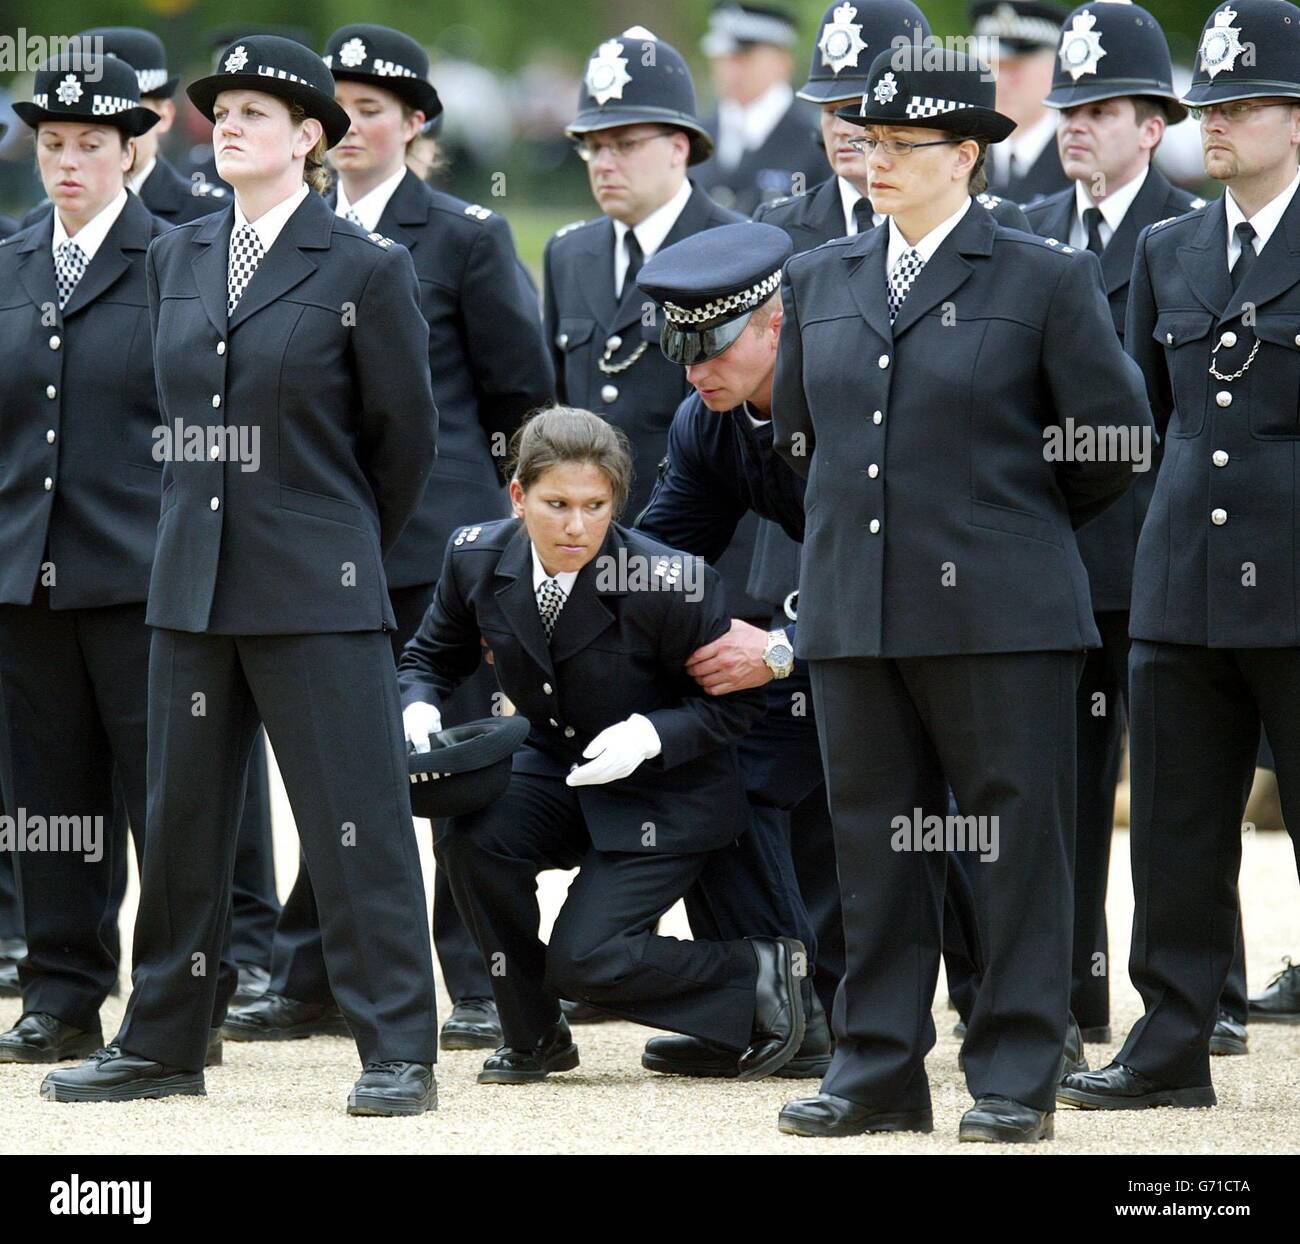 A police officer collapses at a celebration of the Metropolitan Police Service's 175th anniversary at Horse Guards Parade. Stock Photo